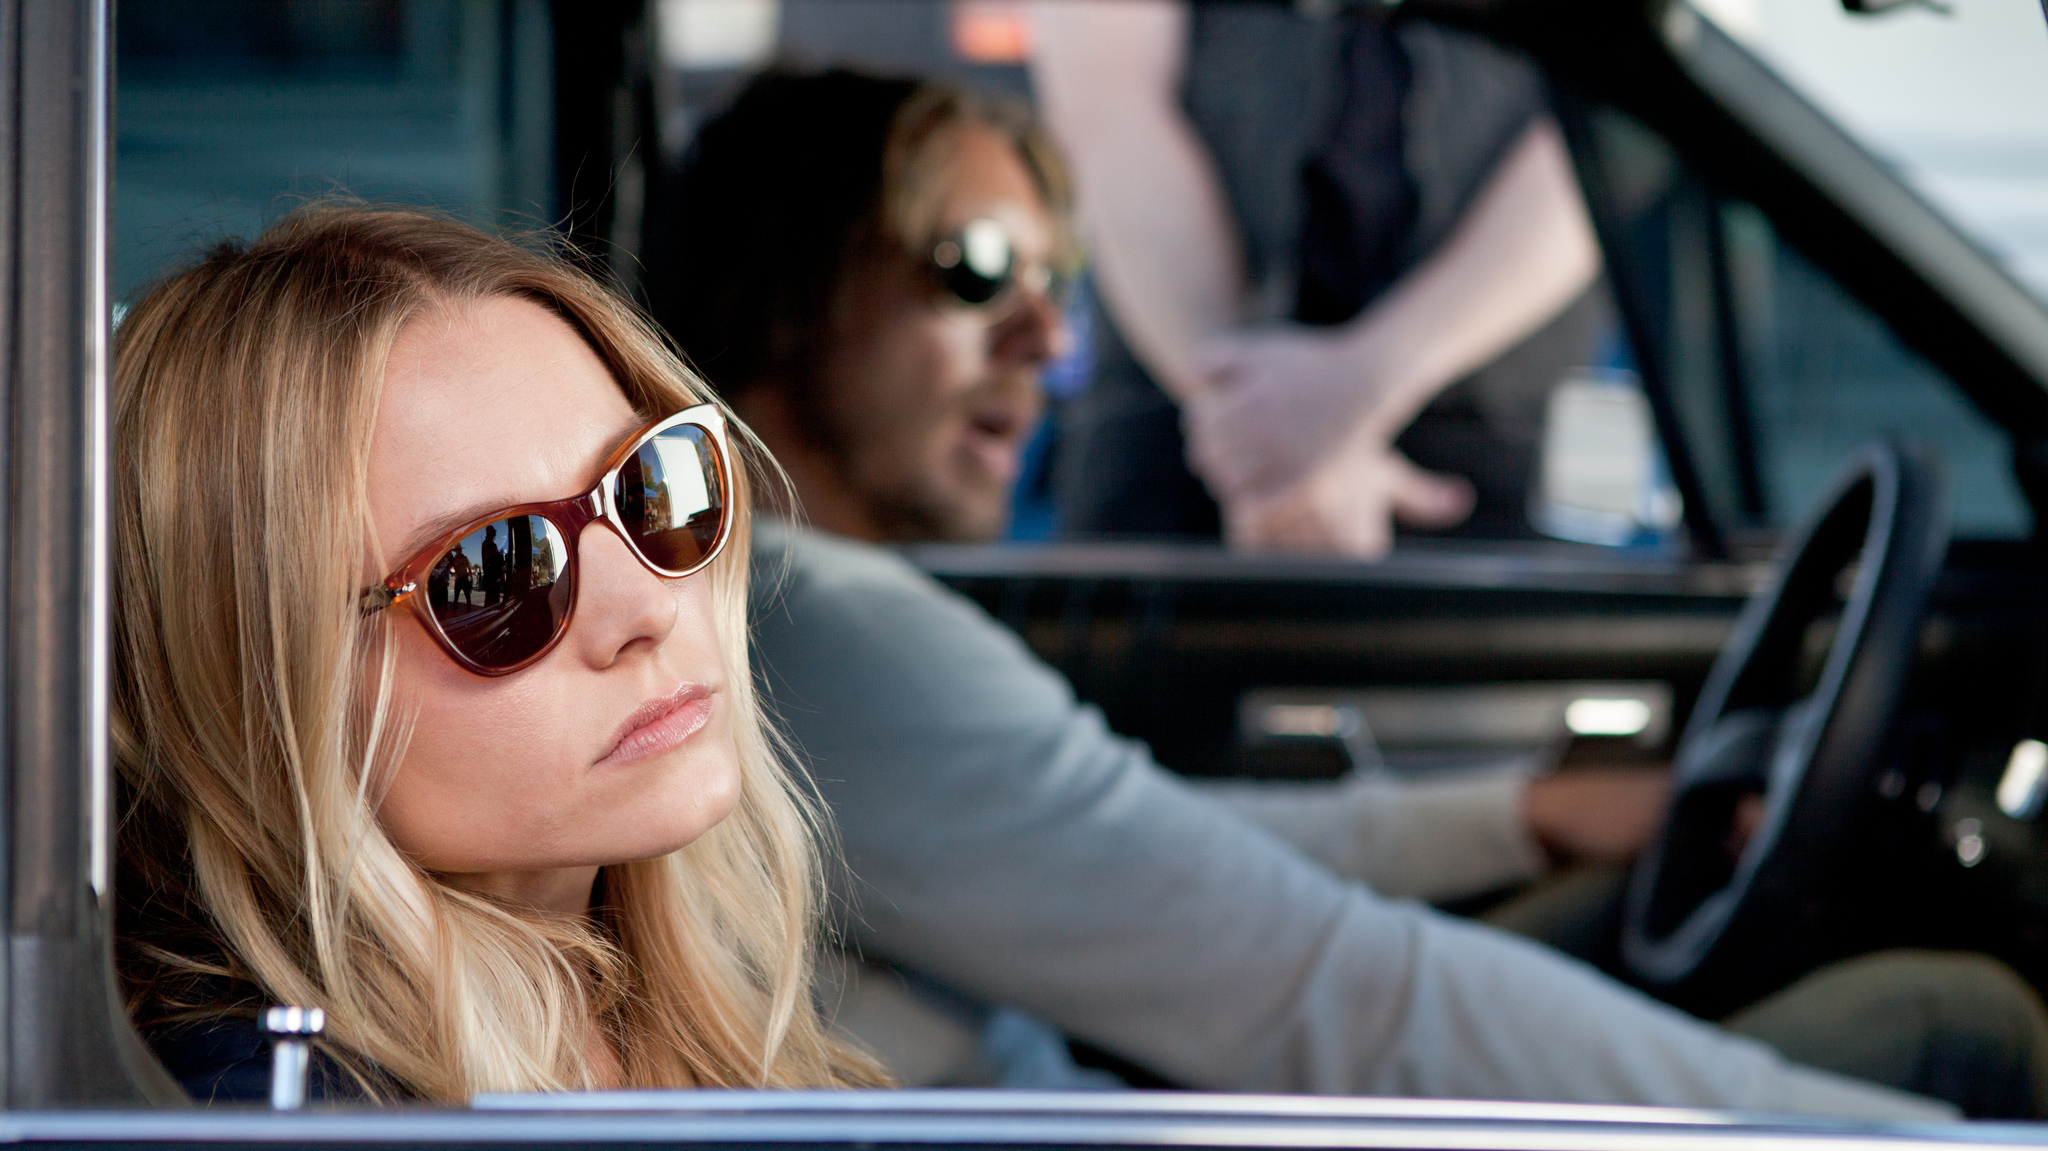 Still of Kristen Bell and Dax Shepard in Hit and Run (2012)